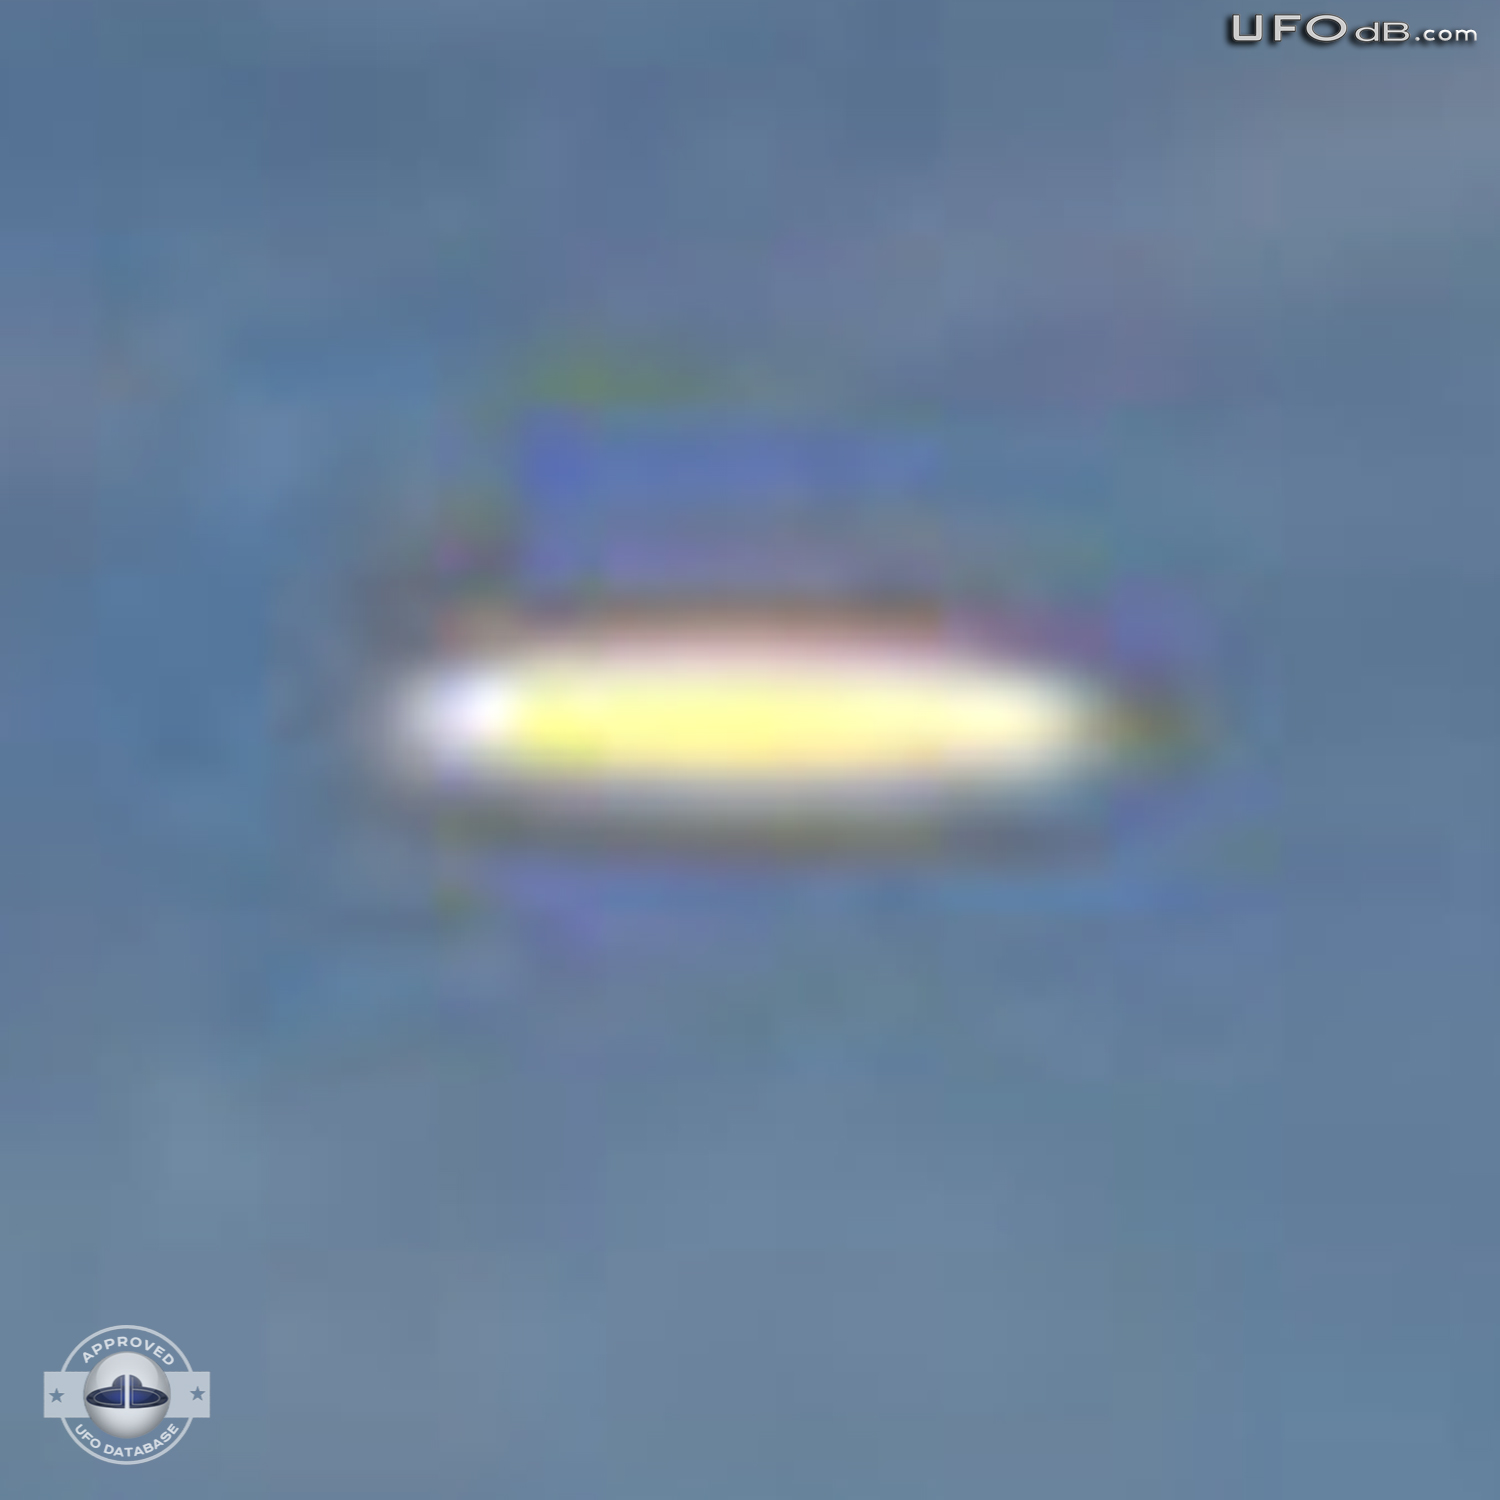 Tourist see UFO from The Stratosphere Hotel, Las Vegas | April 16 2011 UFO Picture #266-5